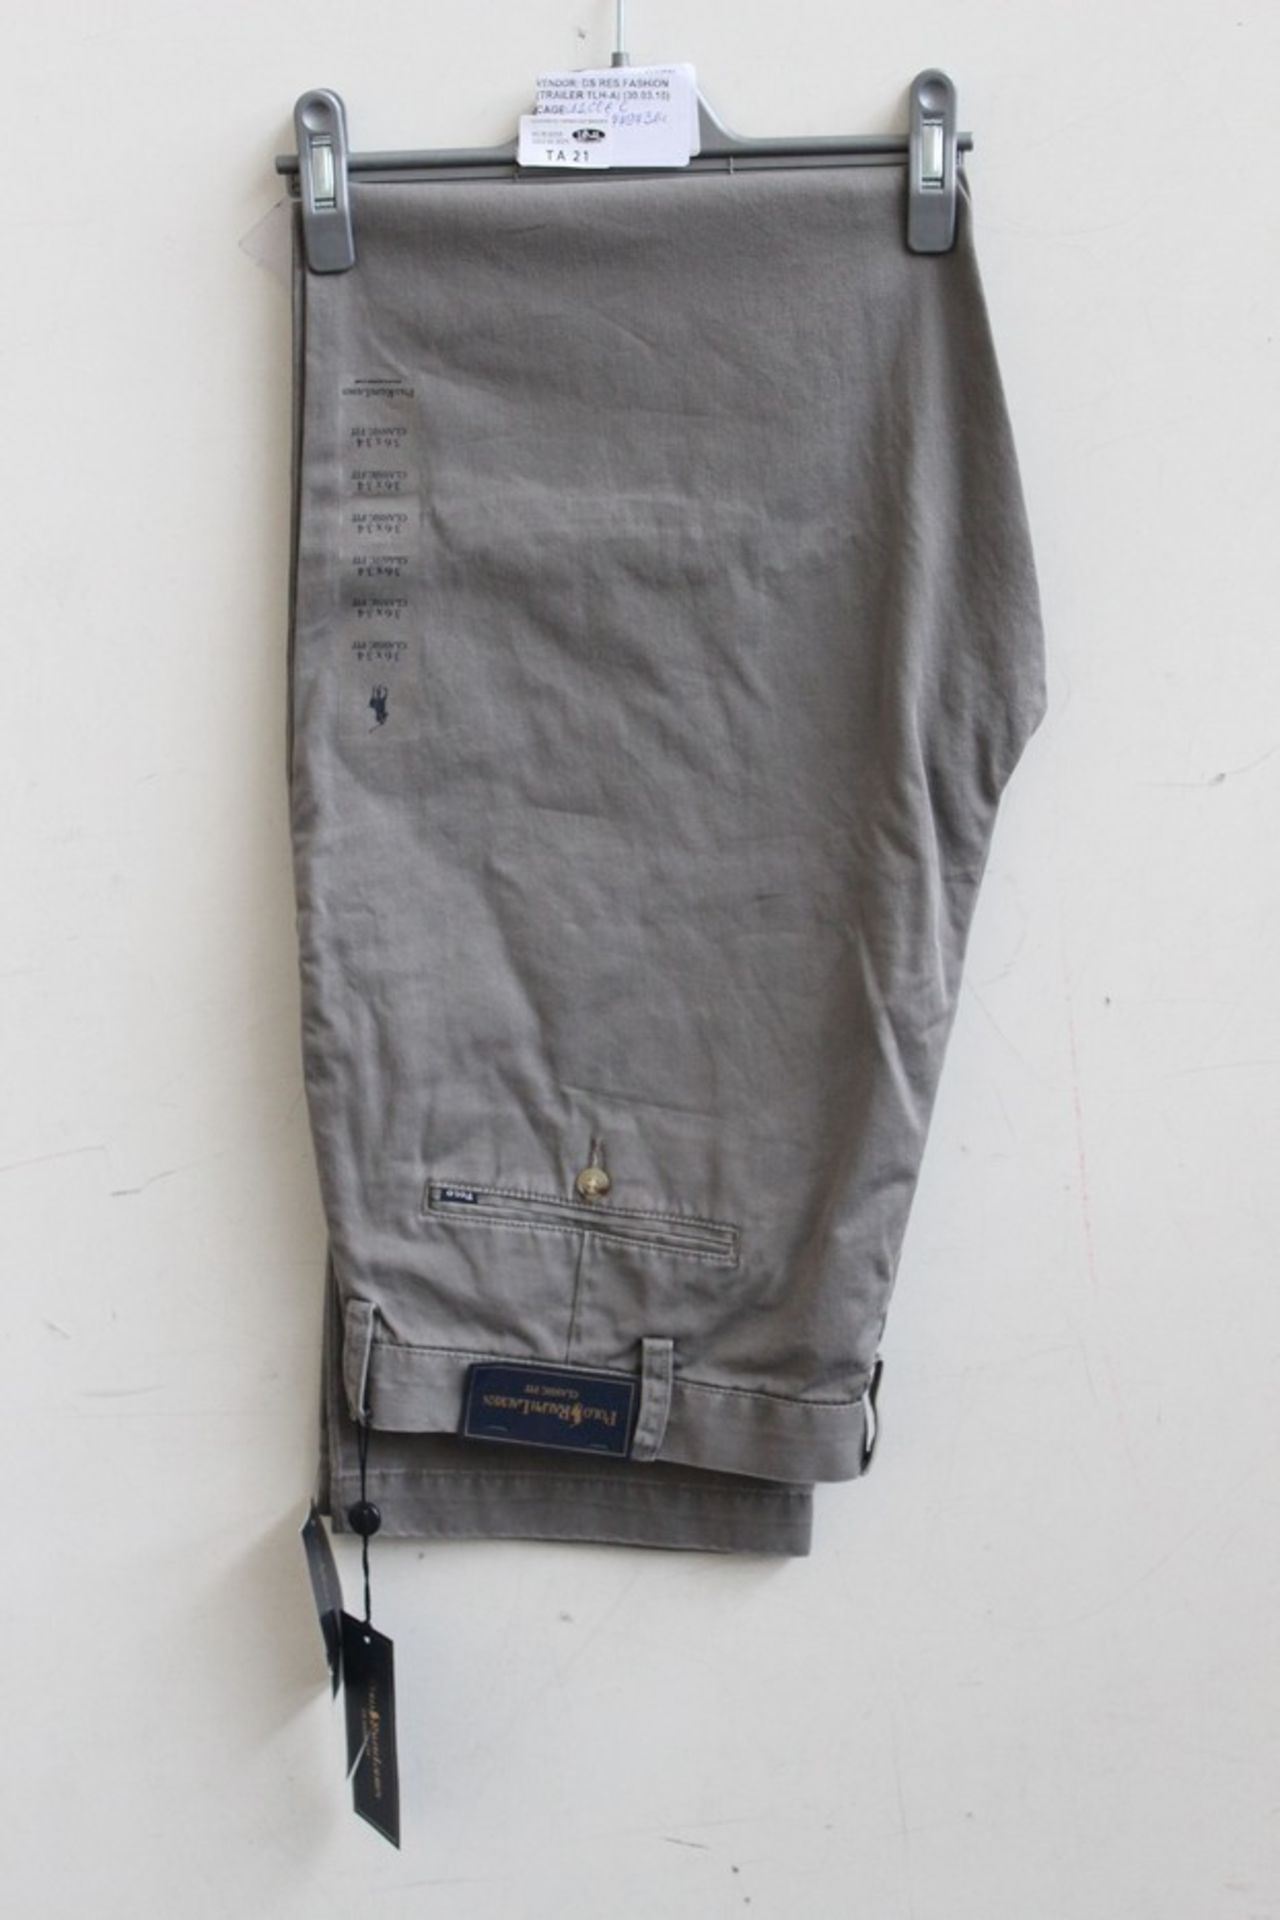 ONE BRAND NEW PAIR OF RALPH LAUREN GREENWICH CHINOS IN REAGAN GREY SIZE 34/32 RRP £100 (DS RES